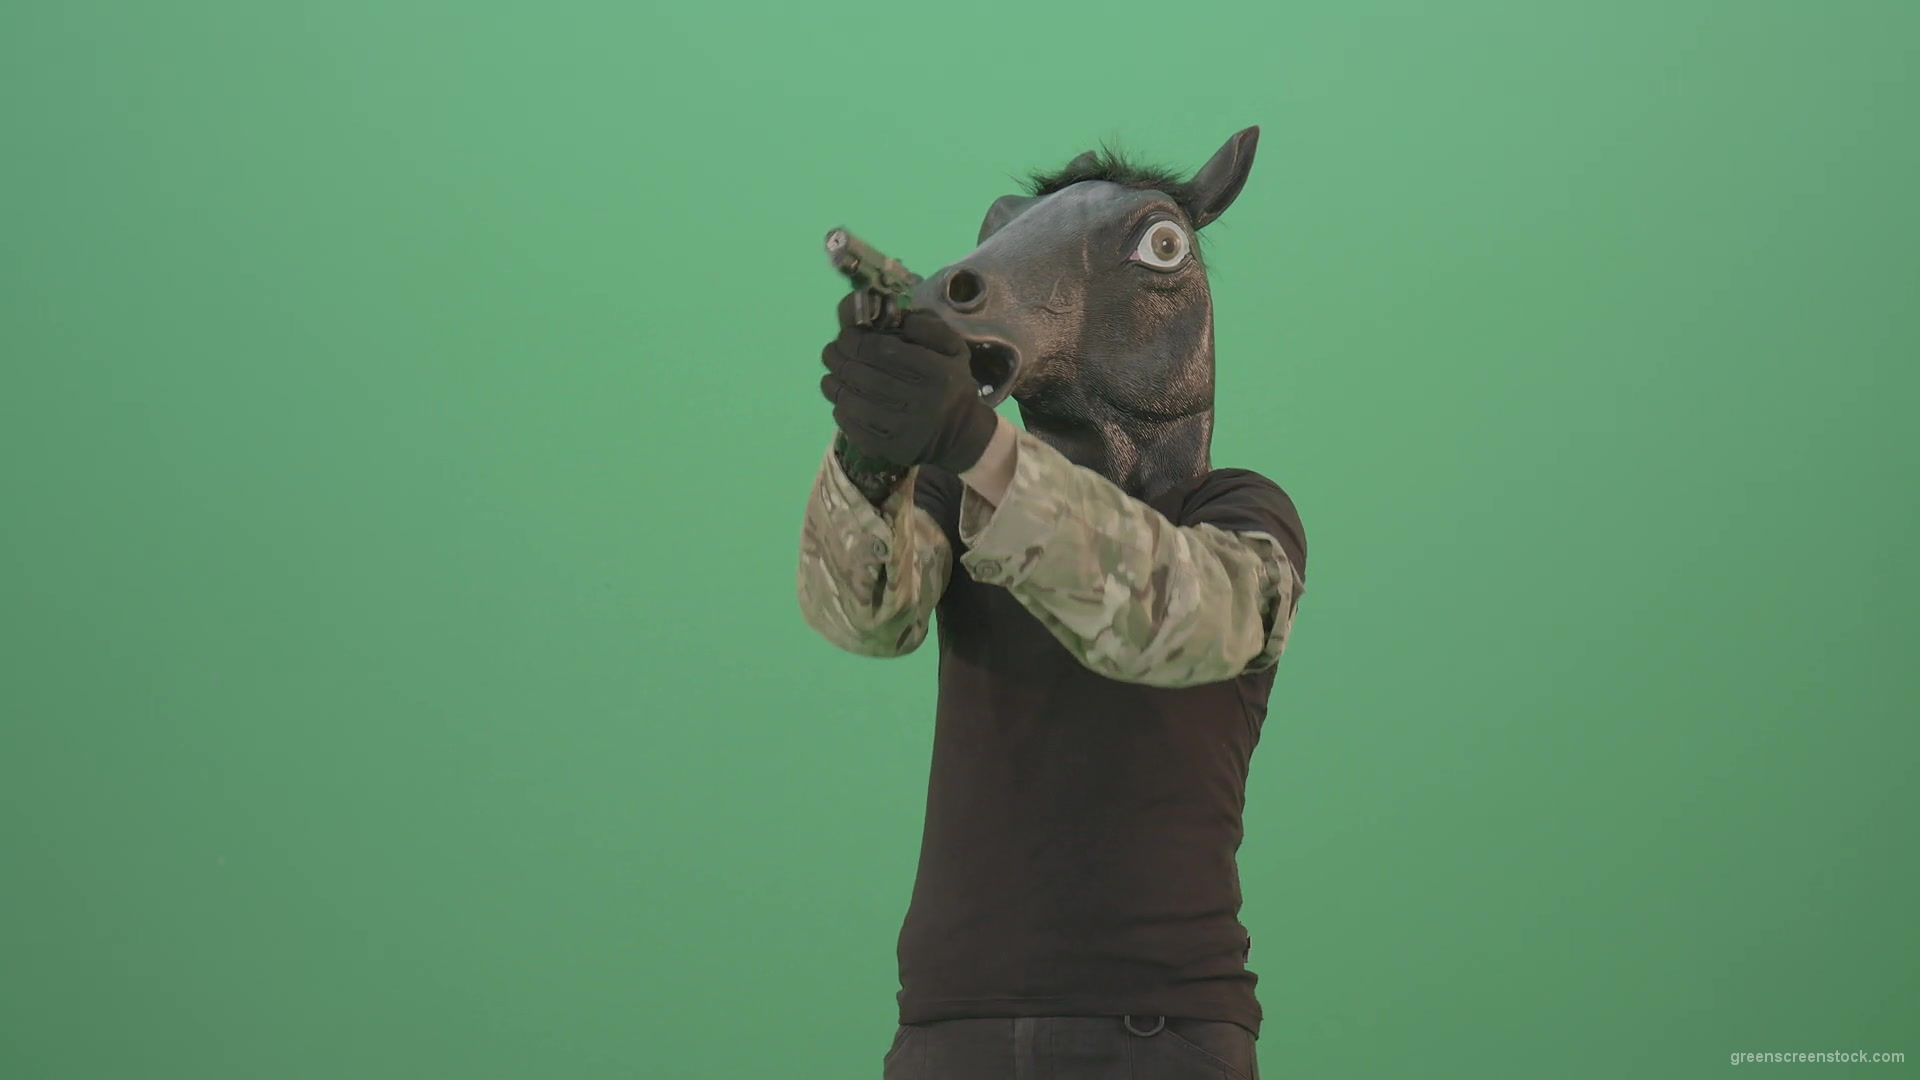 Funny-Horse-Man-in-Mask-shooting-enemies-isolated-on-green-screen-4K-Video-Footage-1920_002 Green Screen Stock